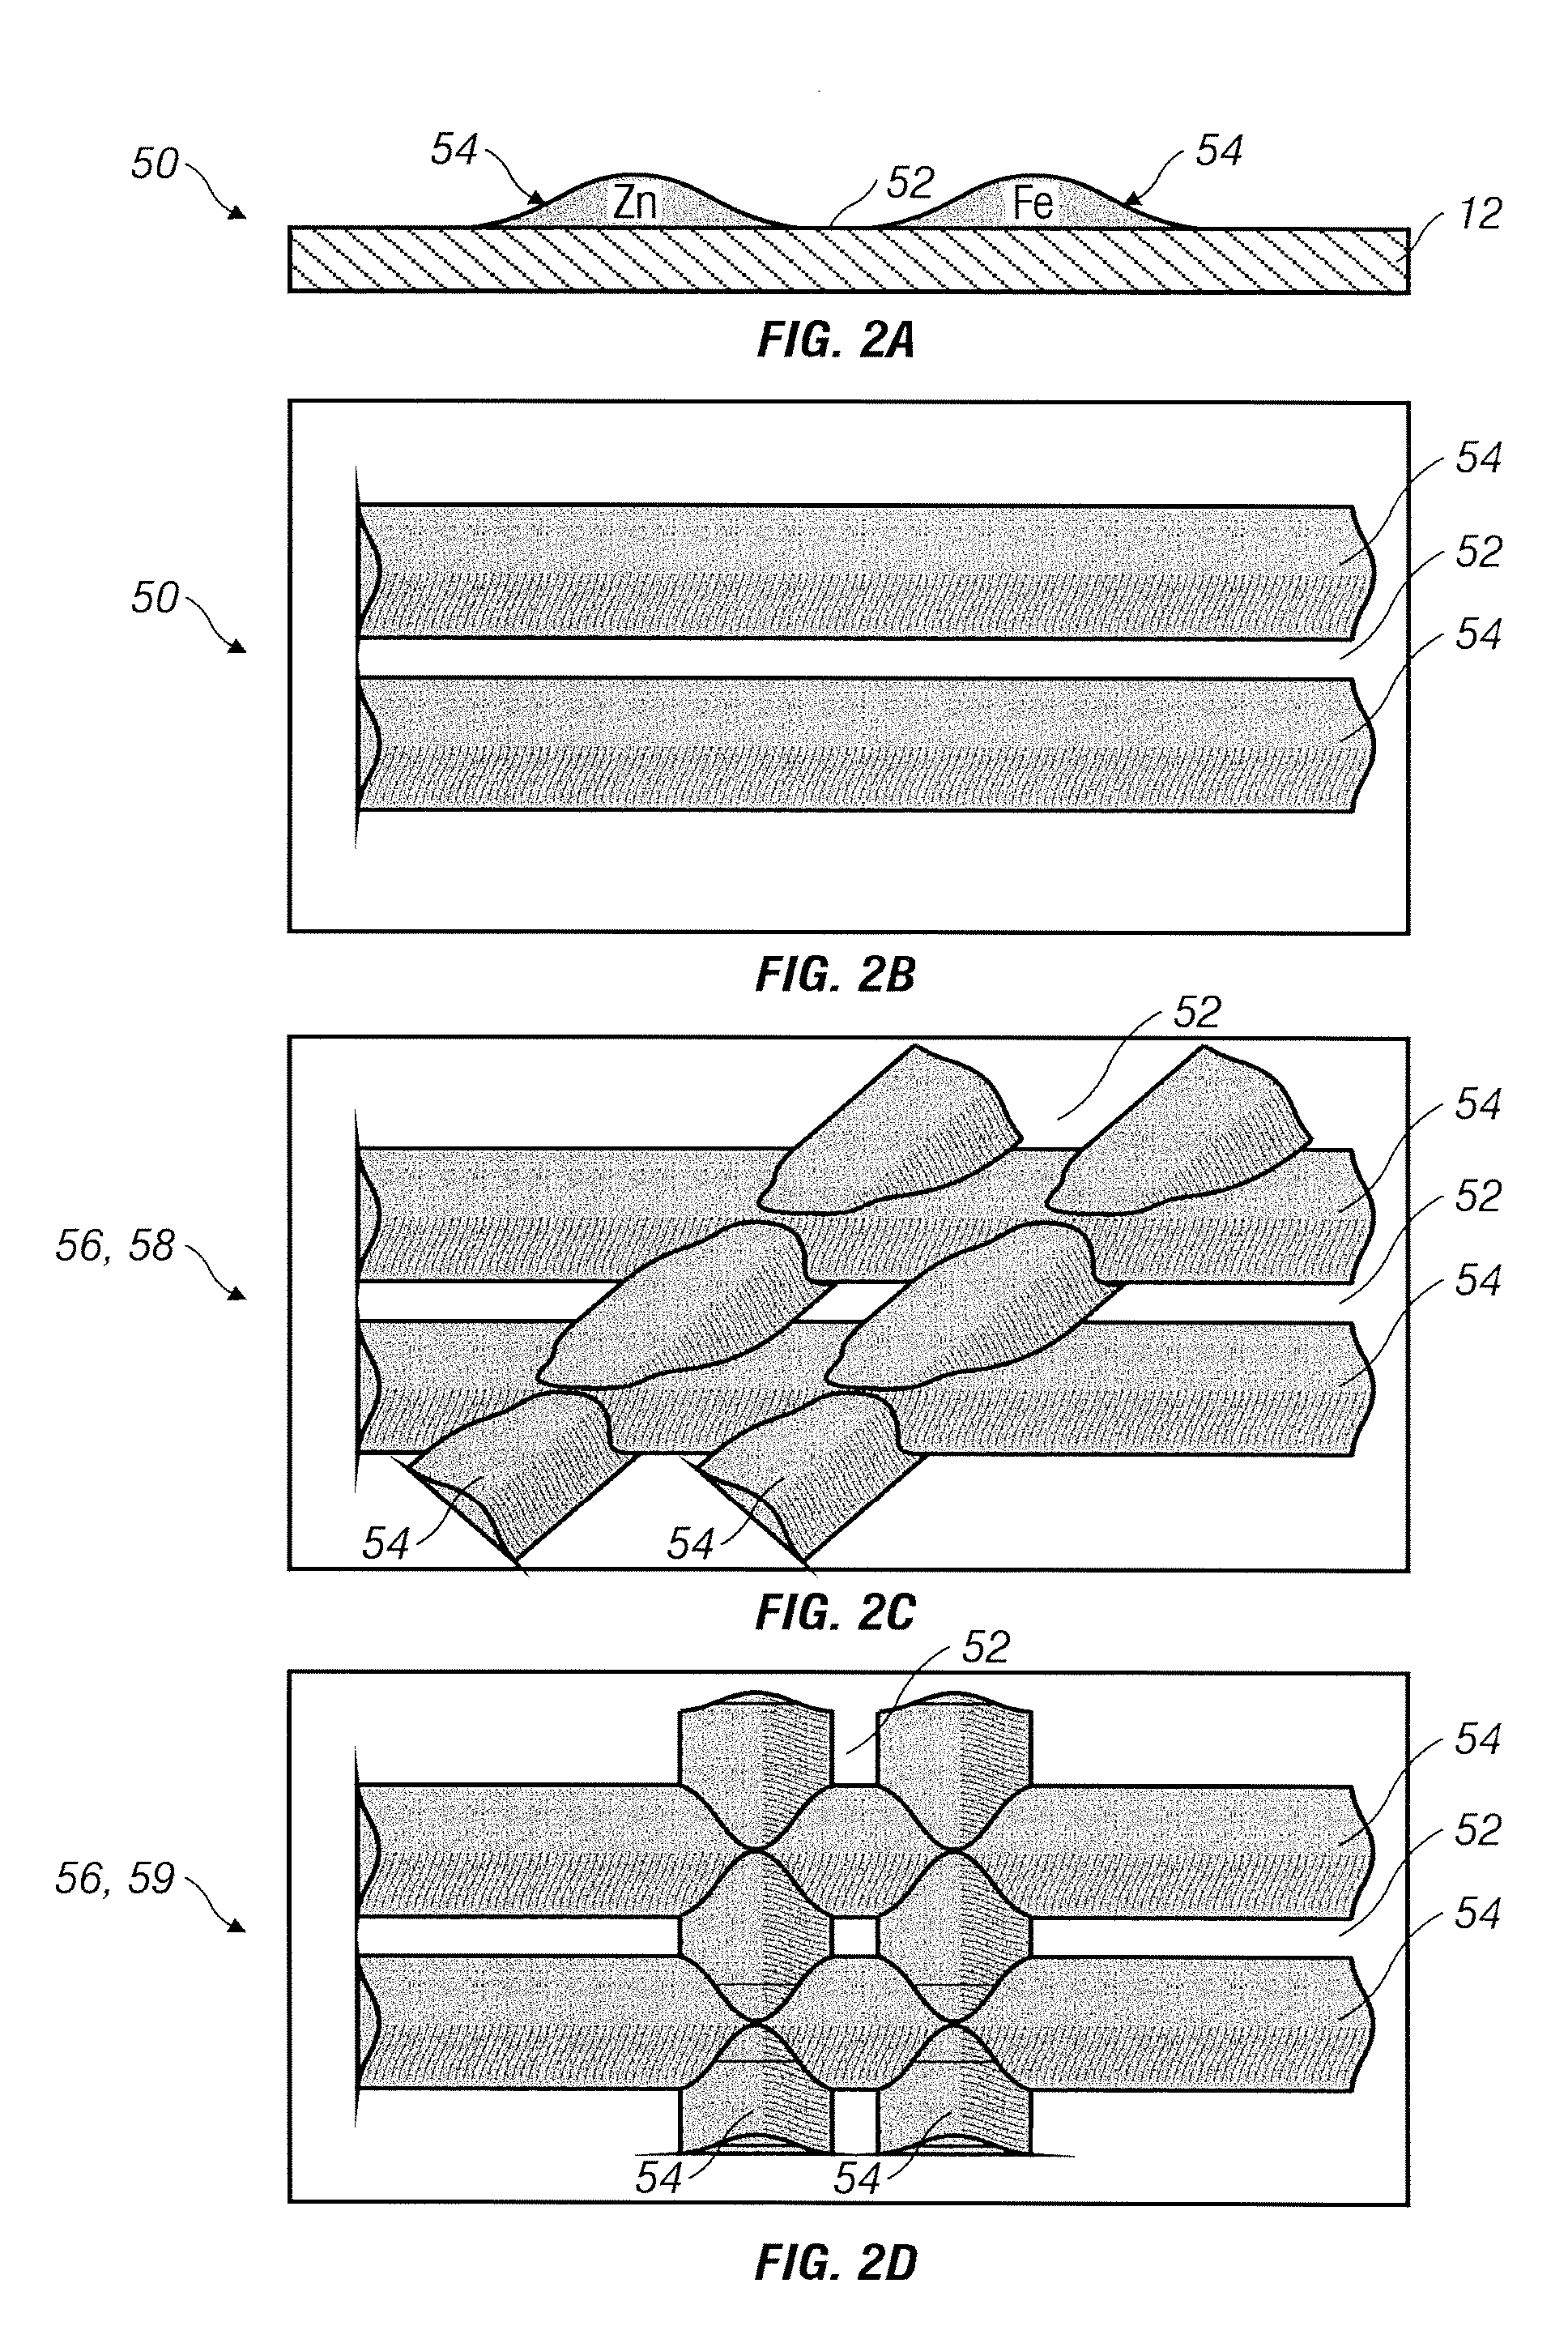 Spray-formed articles made of pseudo-alloy and method for making the same